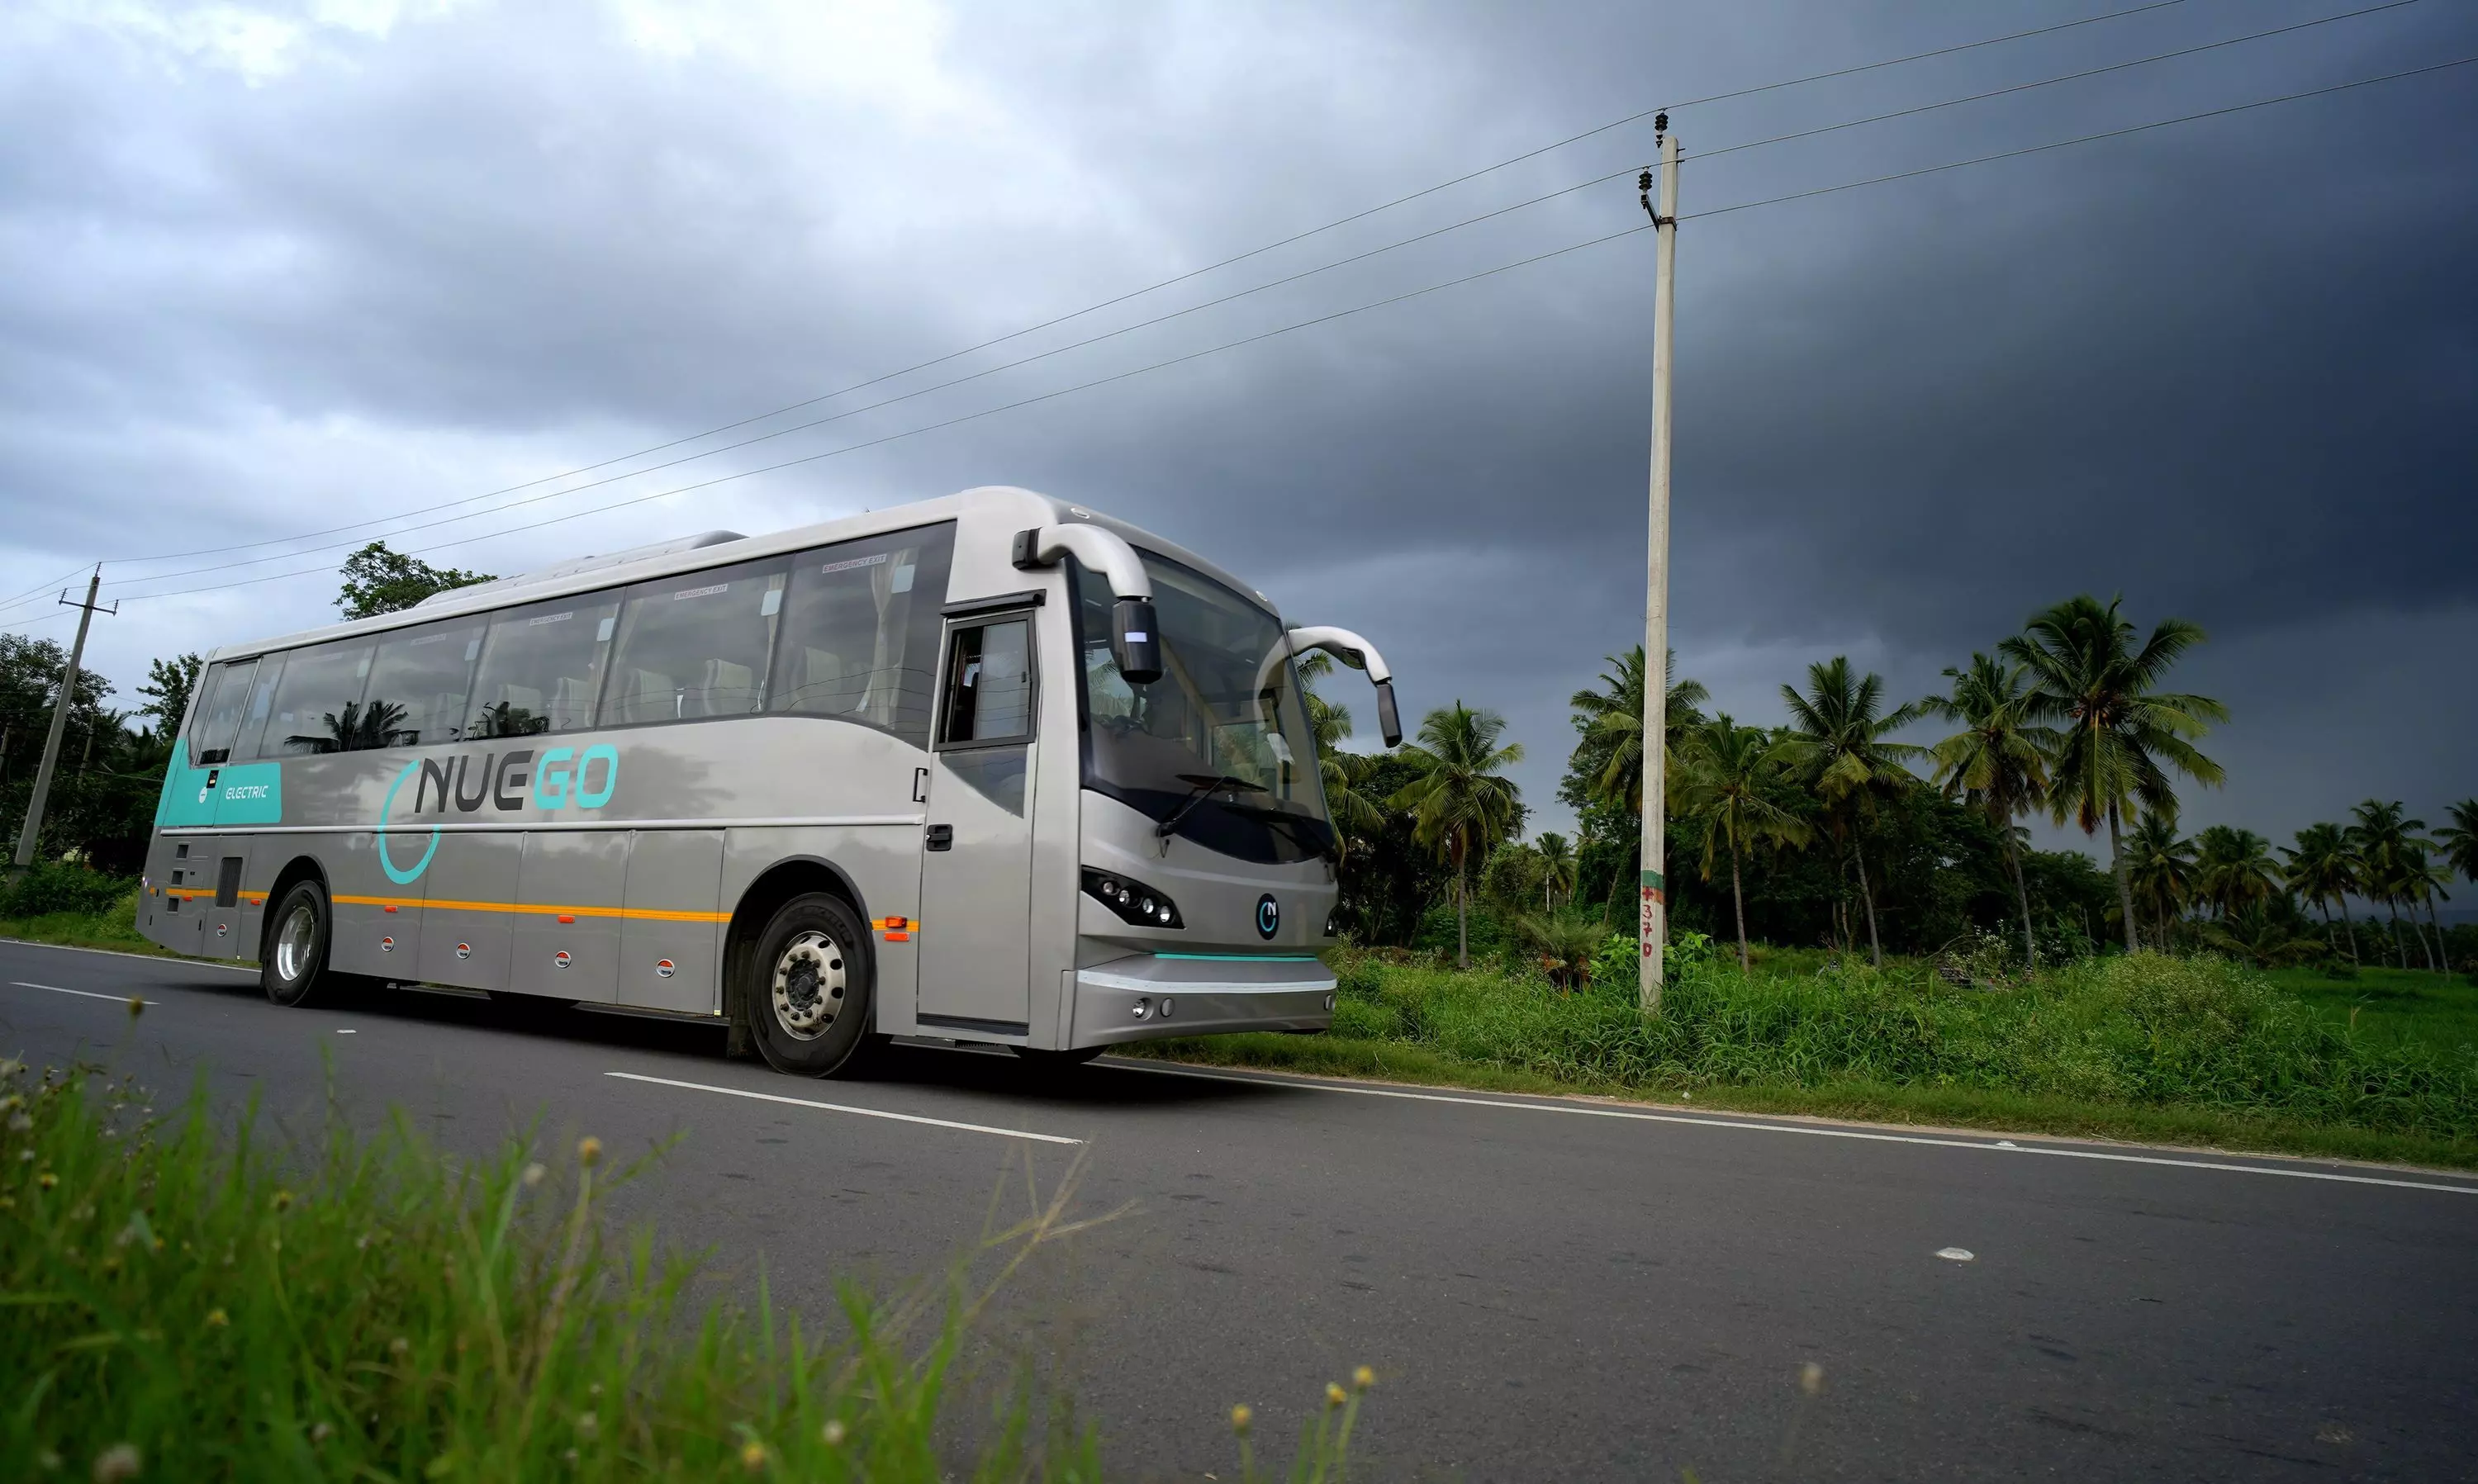 NueGo launches multiple new routes for Intercity Electric bus service